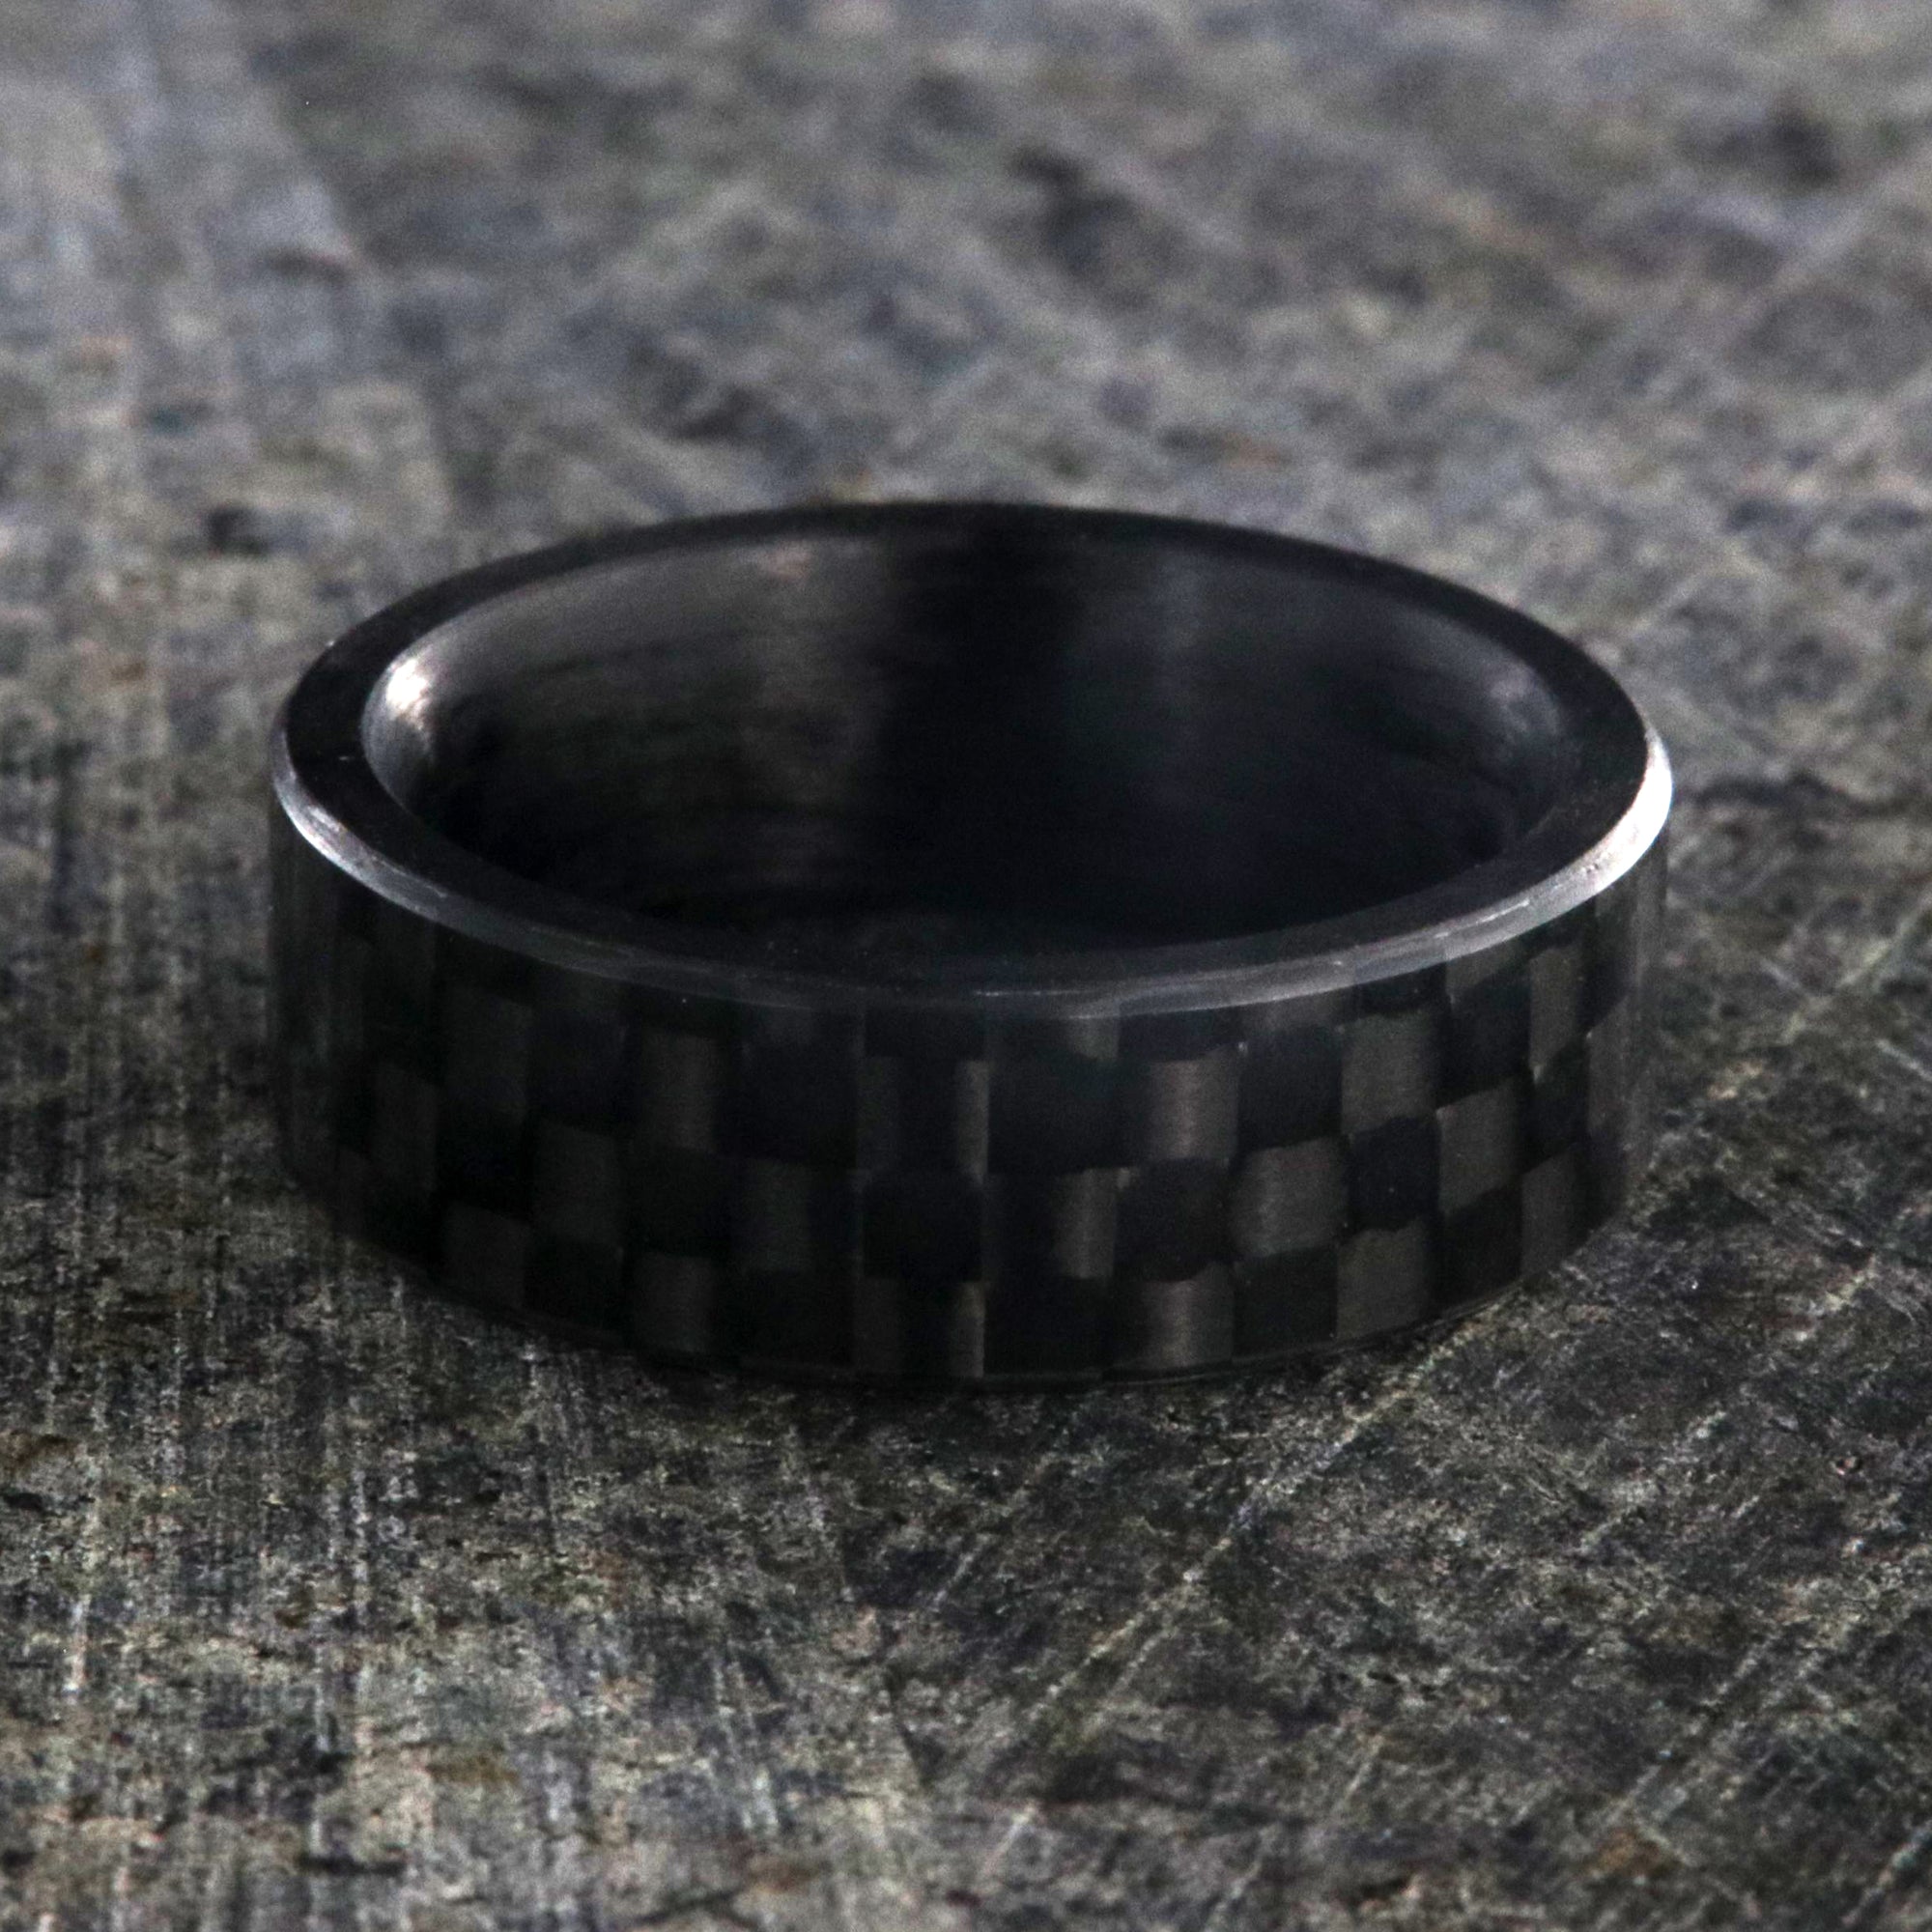 7mm wide black carbon fiber ring with a flat profile